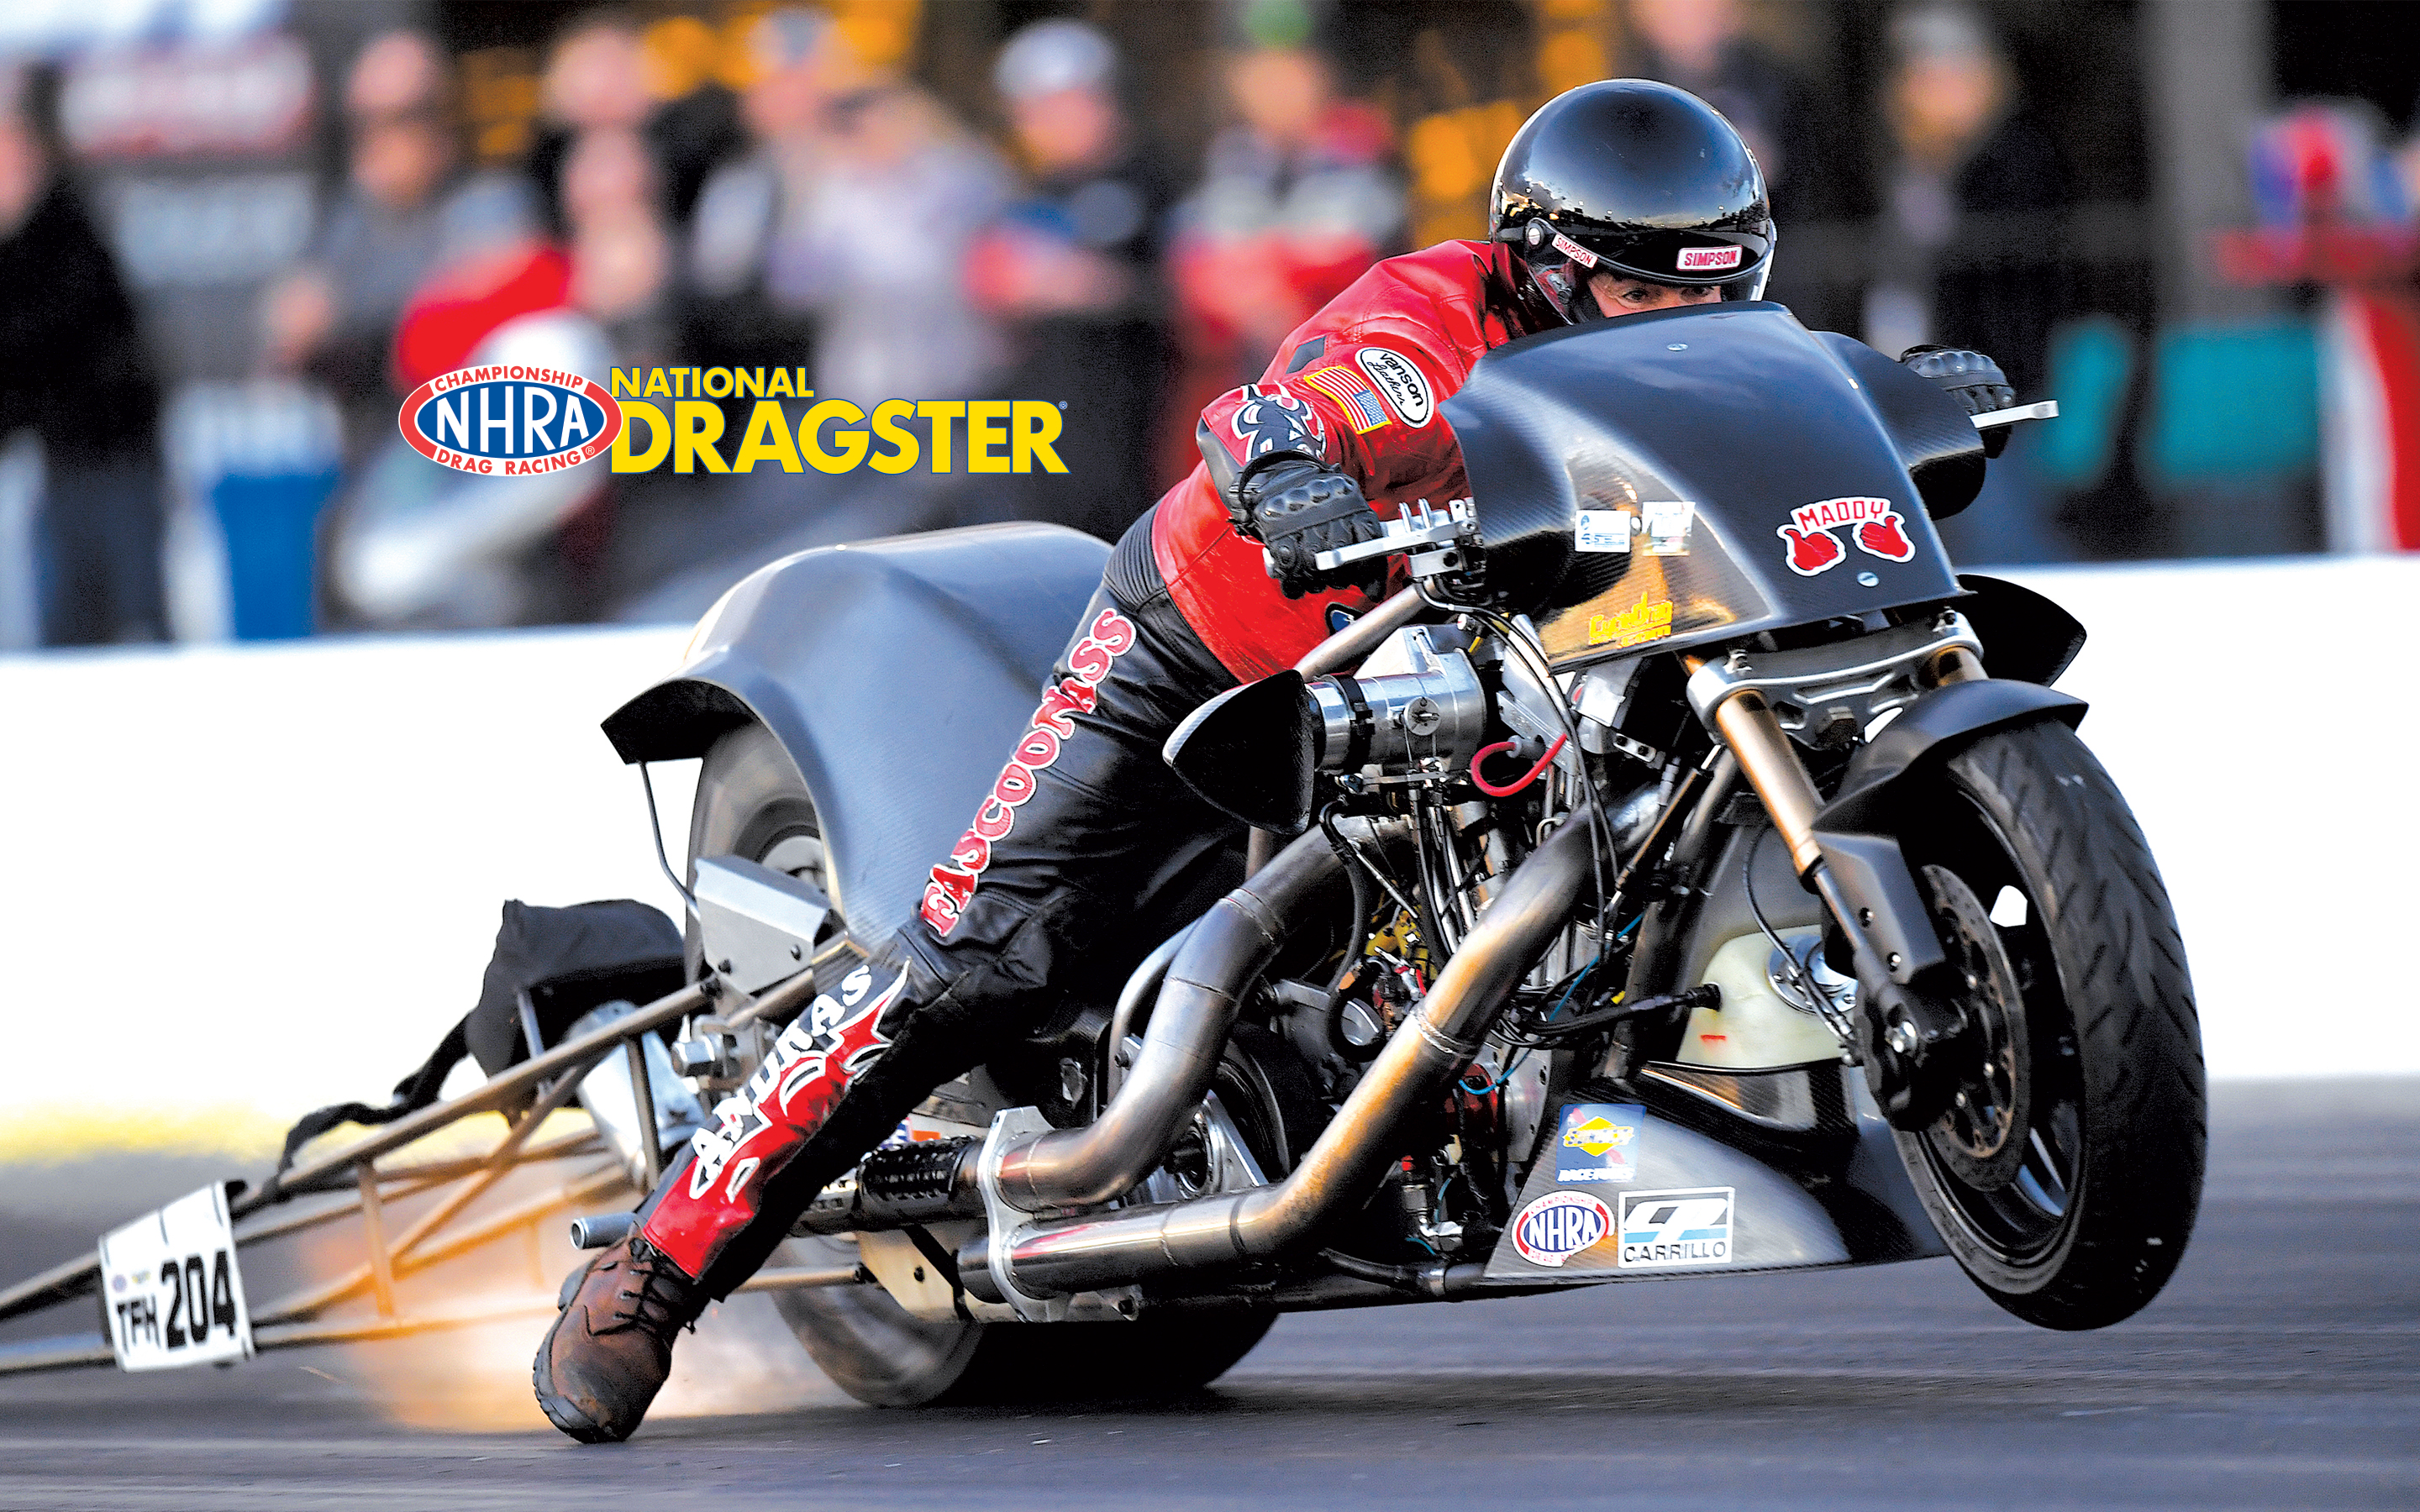 Nhra National Dragster Wallpaper Image Issue